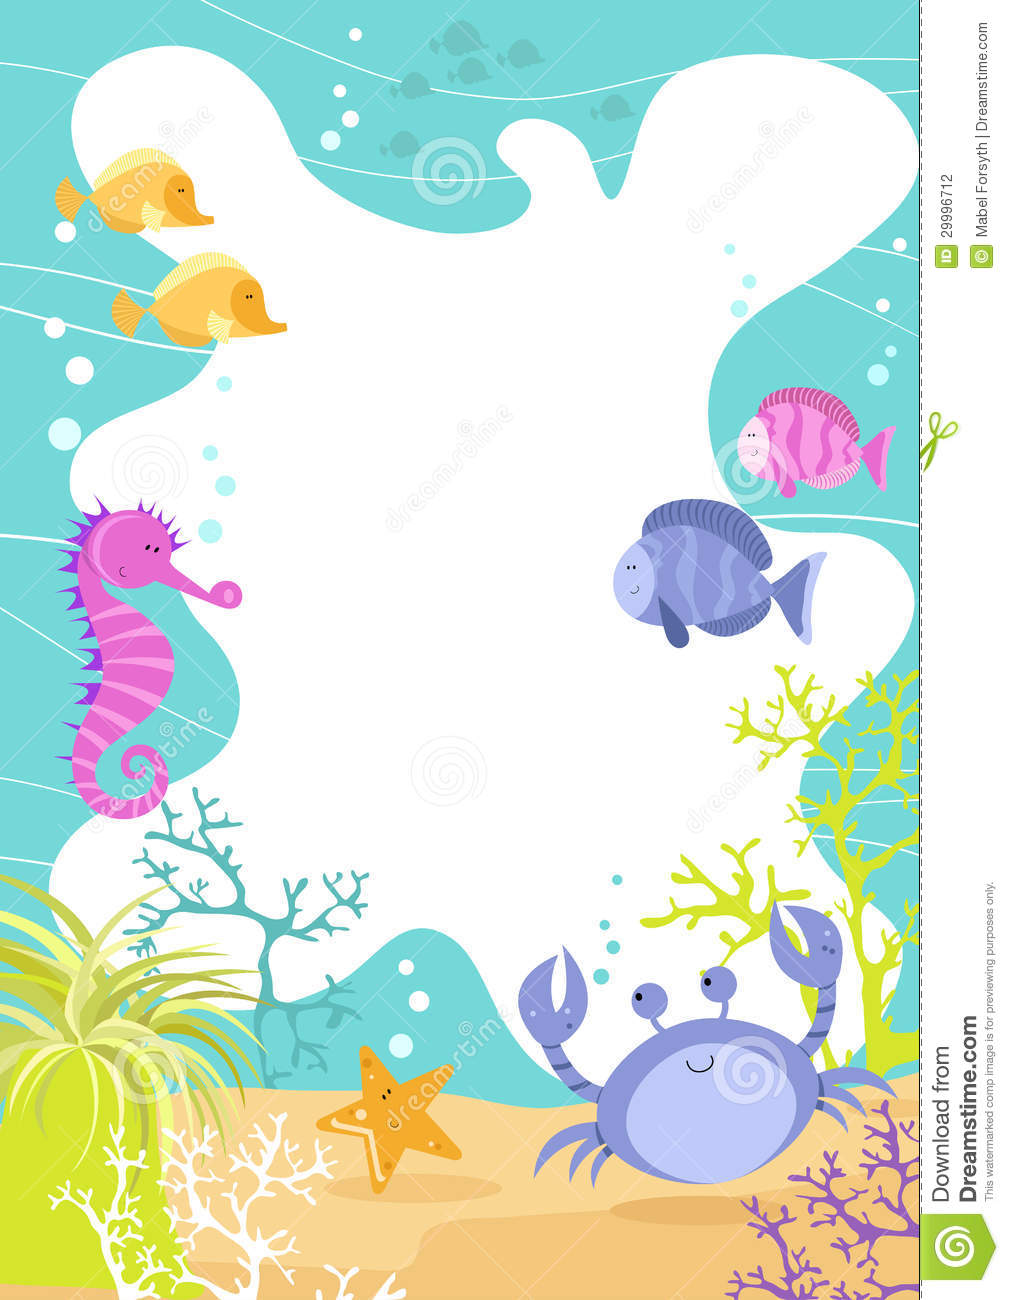 Colourful Fun Childrens Border With Sea Creatures Waves Crab